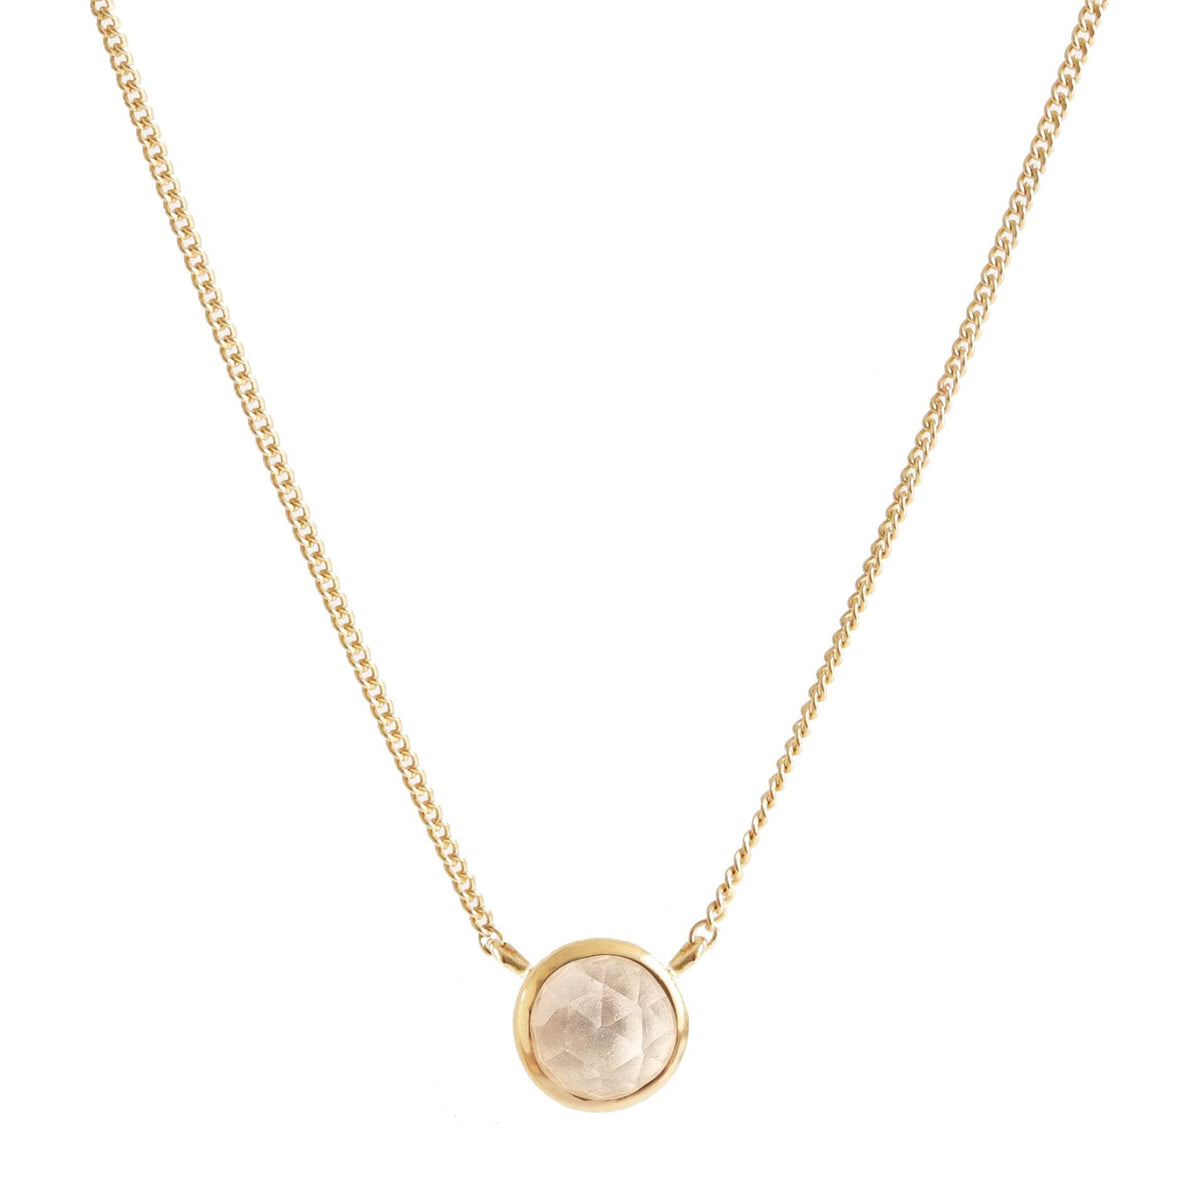 DAINTY LEGACY NECKLACE - WHITE TOPAZ &amp; GOLD - SO PRETTY CARA COTTER